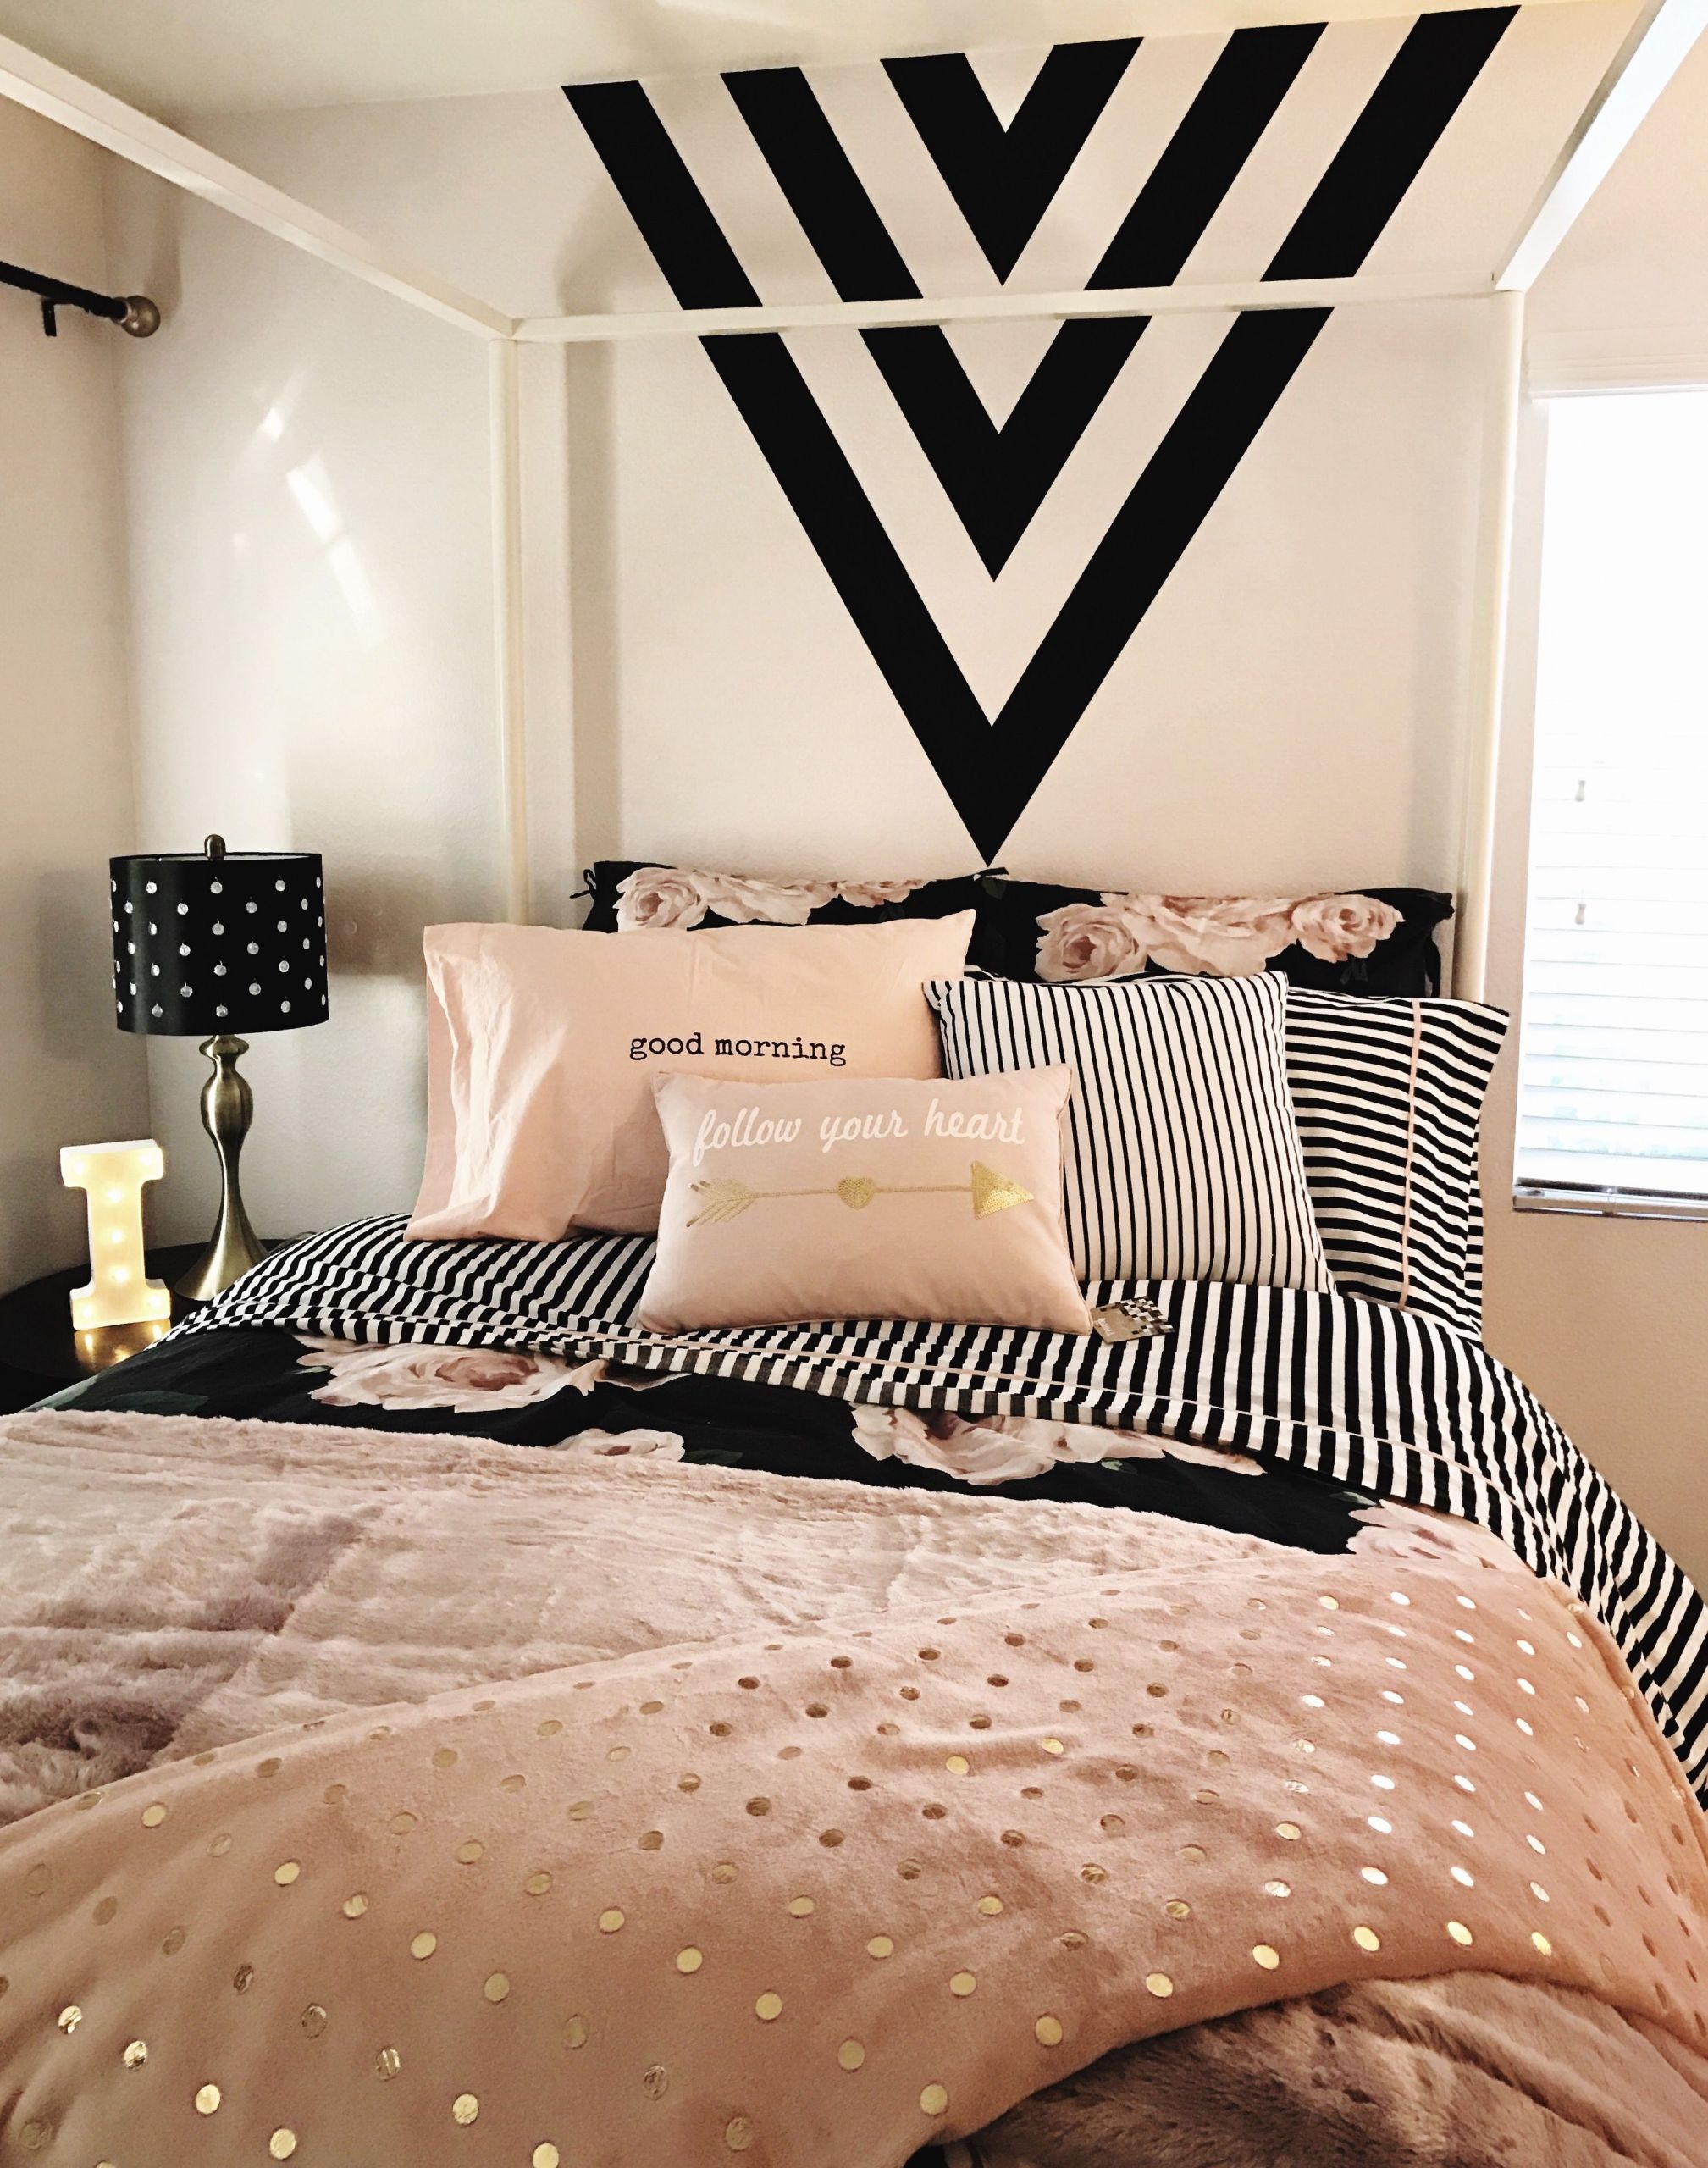 Rose Gold Bedroom Decor
 Girls room Black gold and pink Black paint feature wall